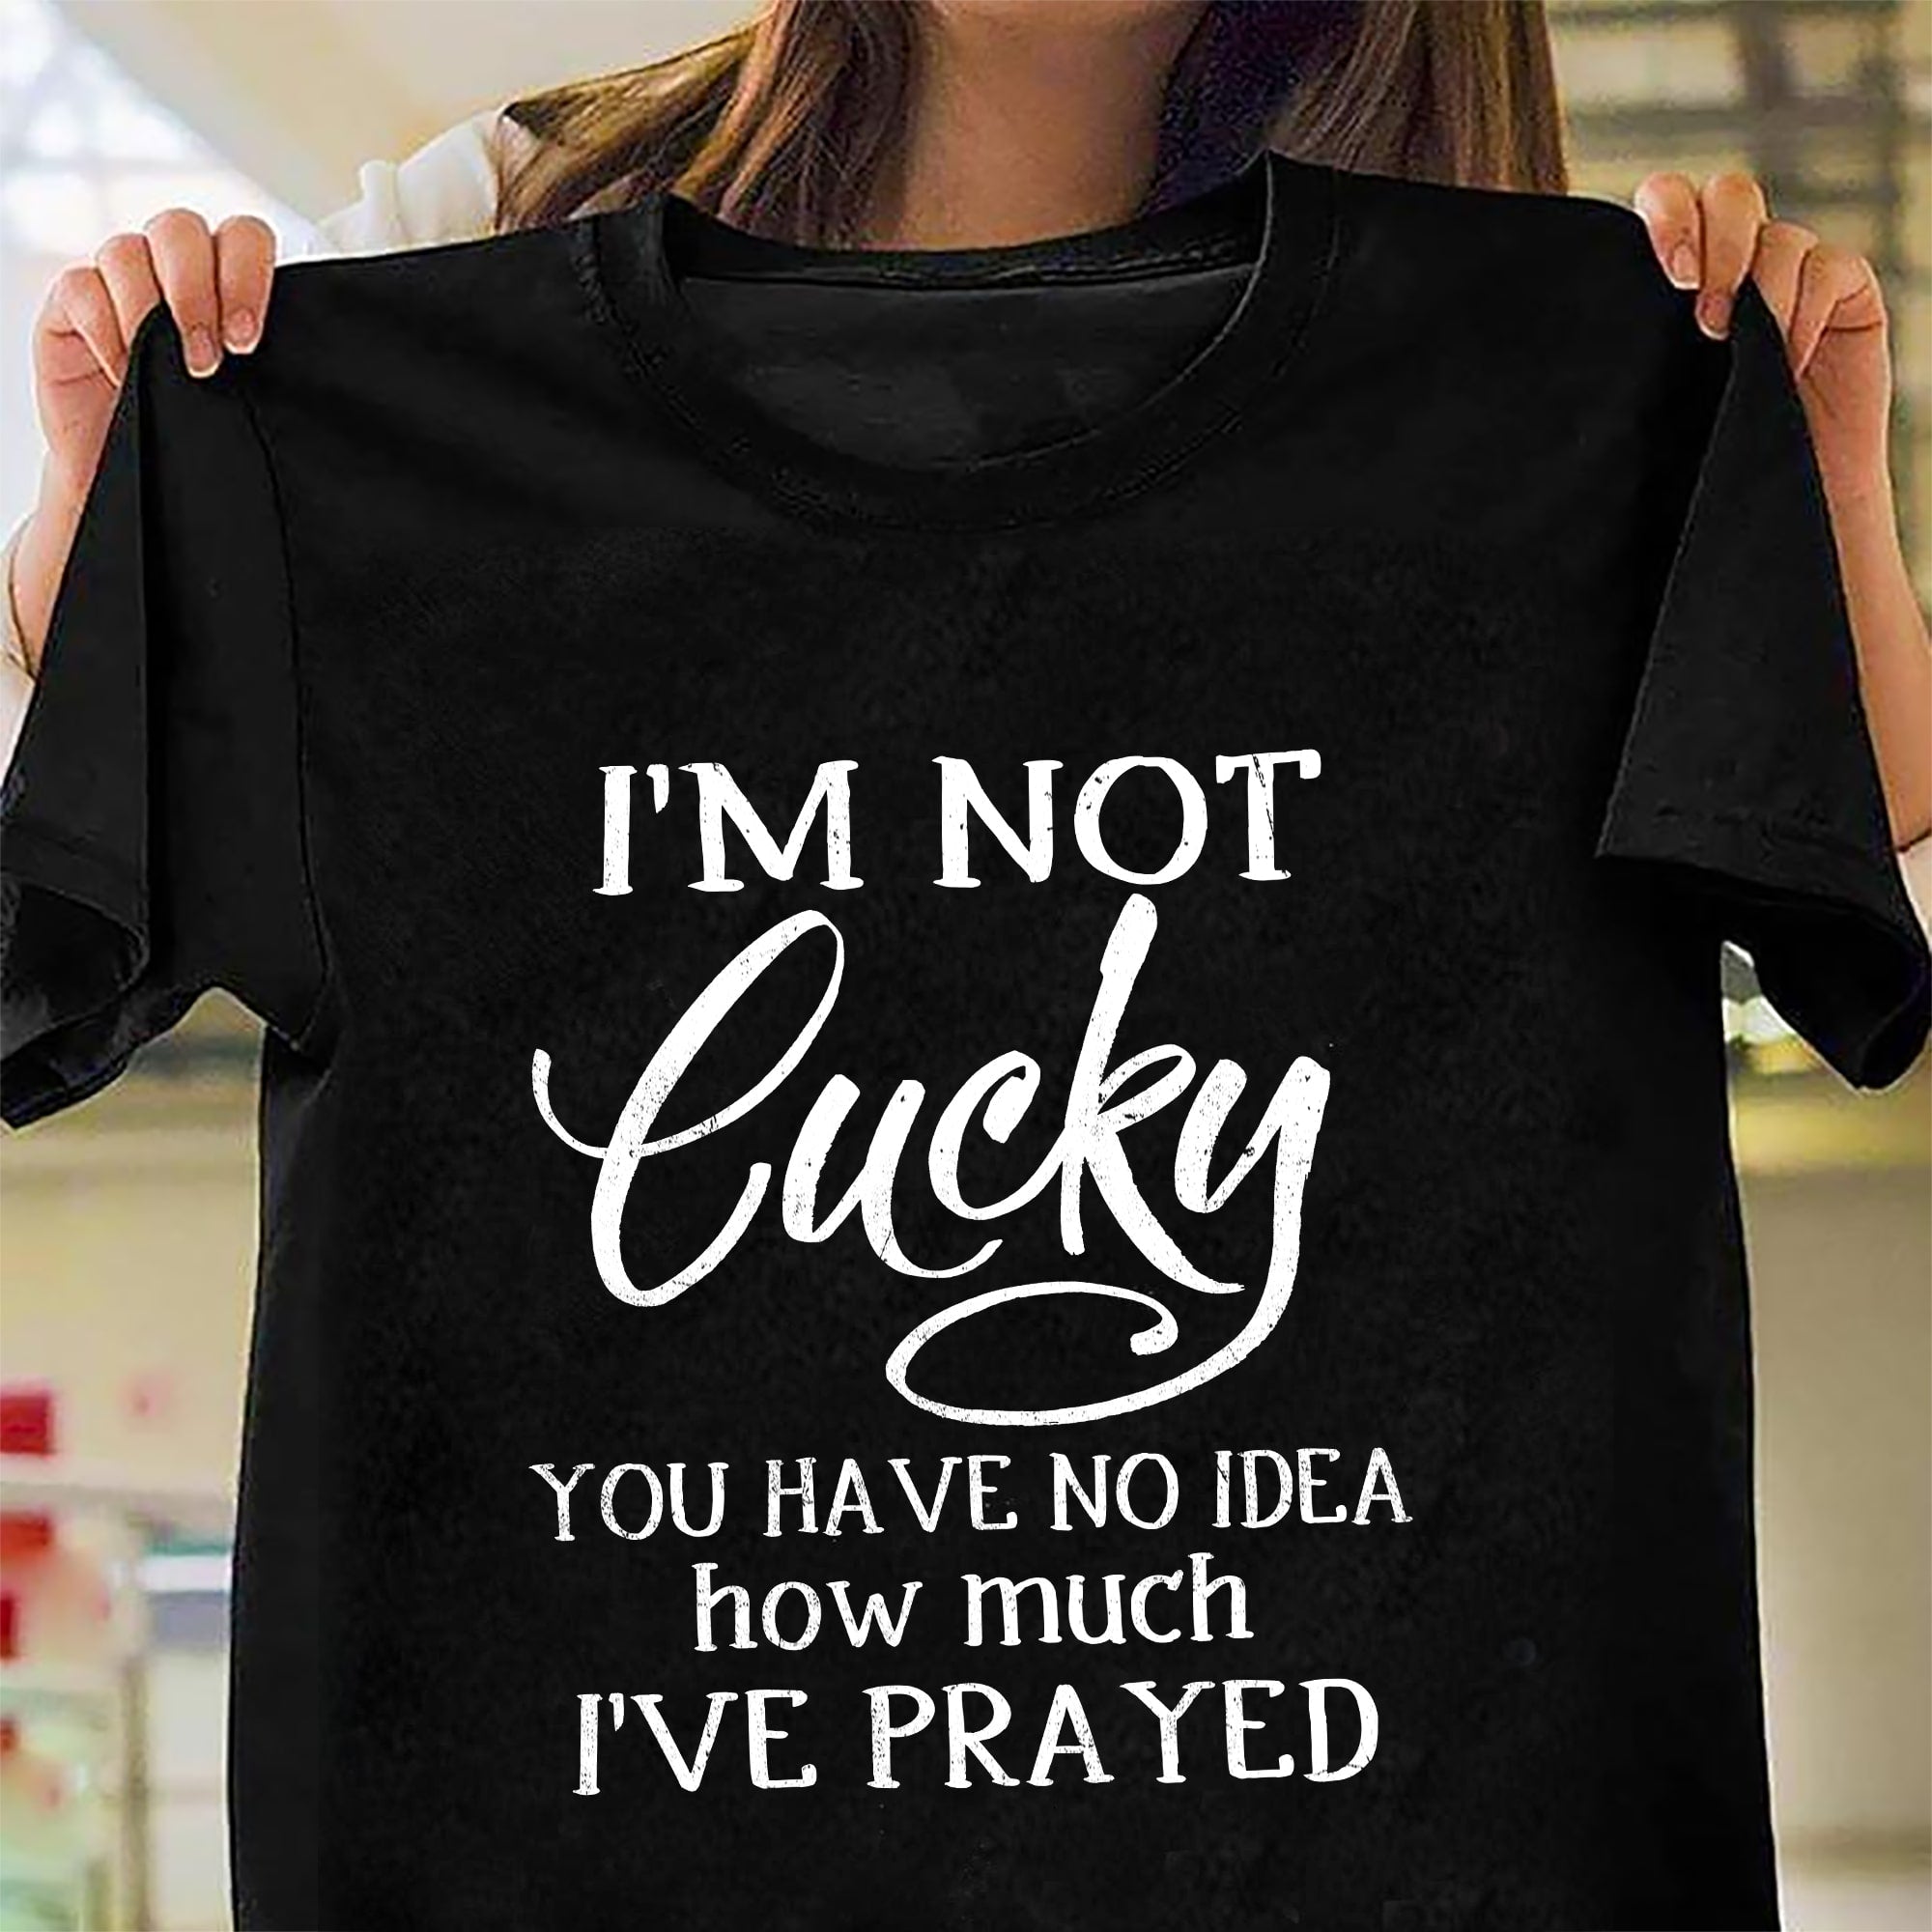 Jesus - I'm not lucky You have no idea how much I've prayed - Black Apparel